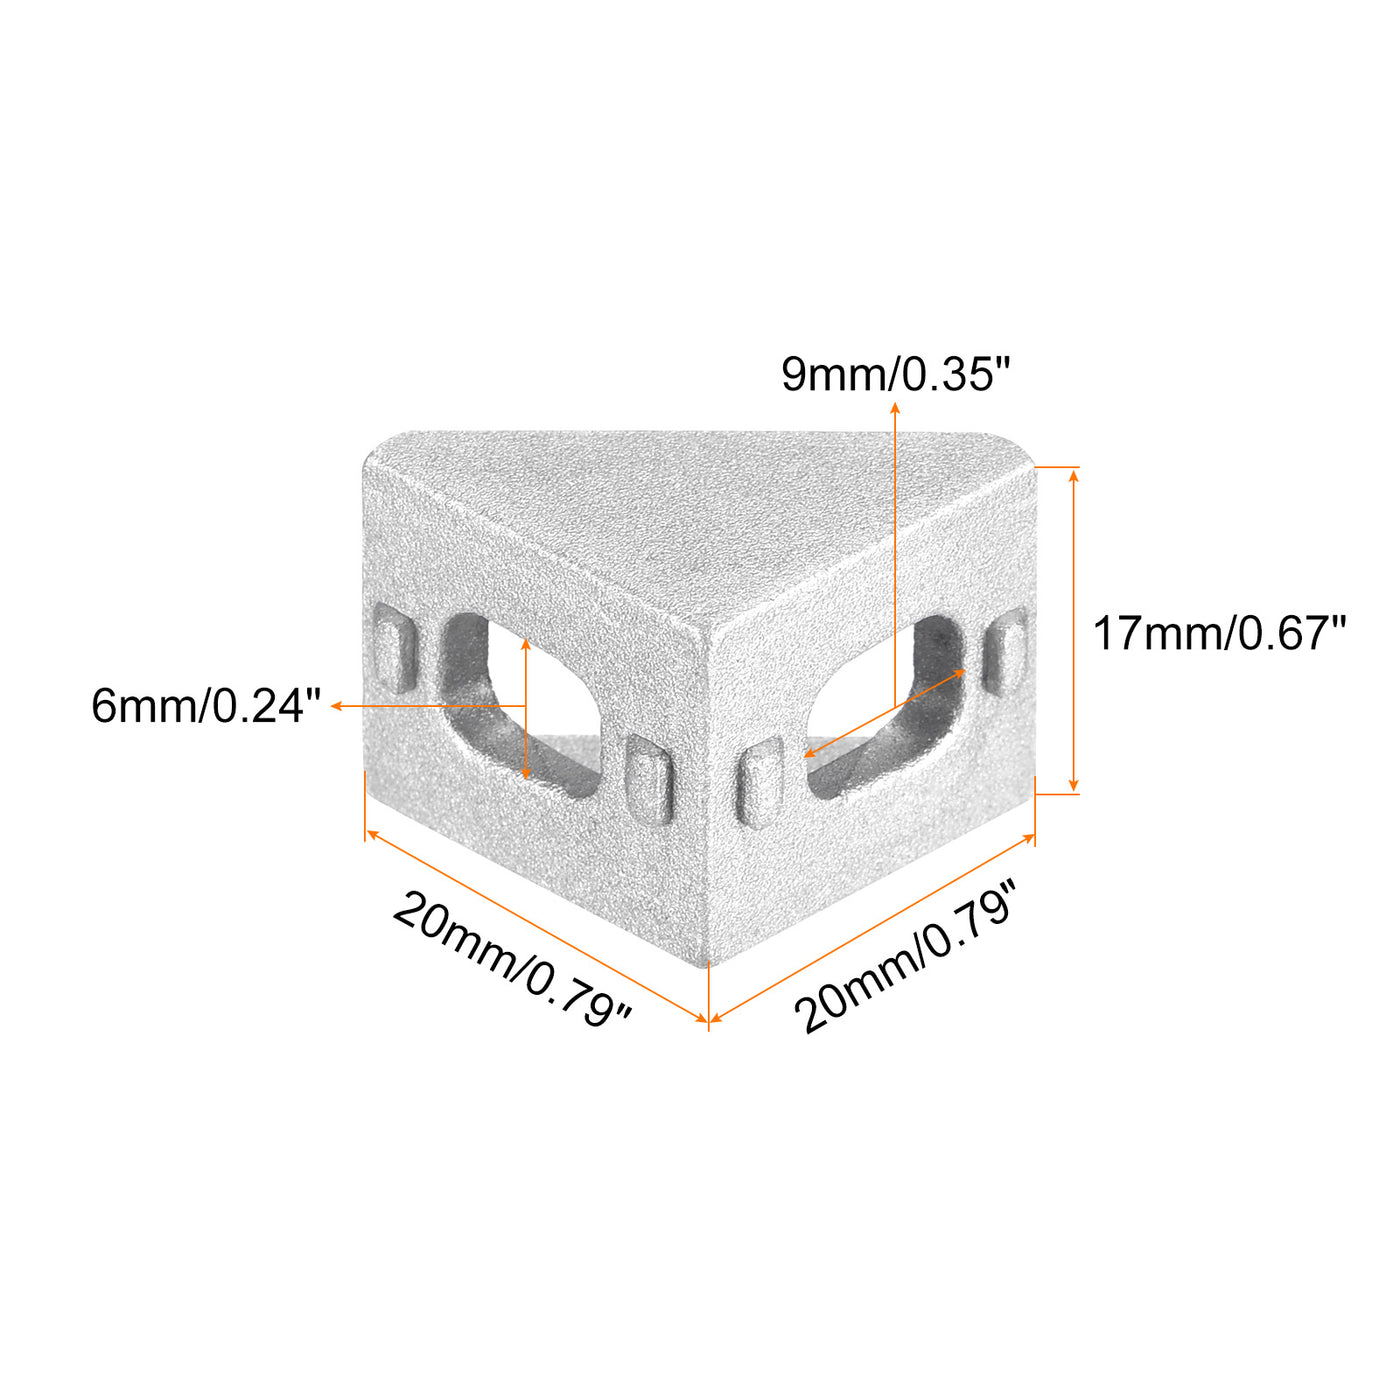 uxcell Uxcell 8Pcs Inside Corner Bracket Gusset, 20x20x17mm 2020 Angle Connectors for 2020 Series Aluminum Extrusion Profile Silver